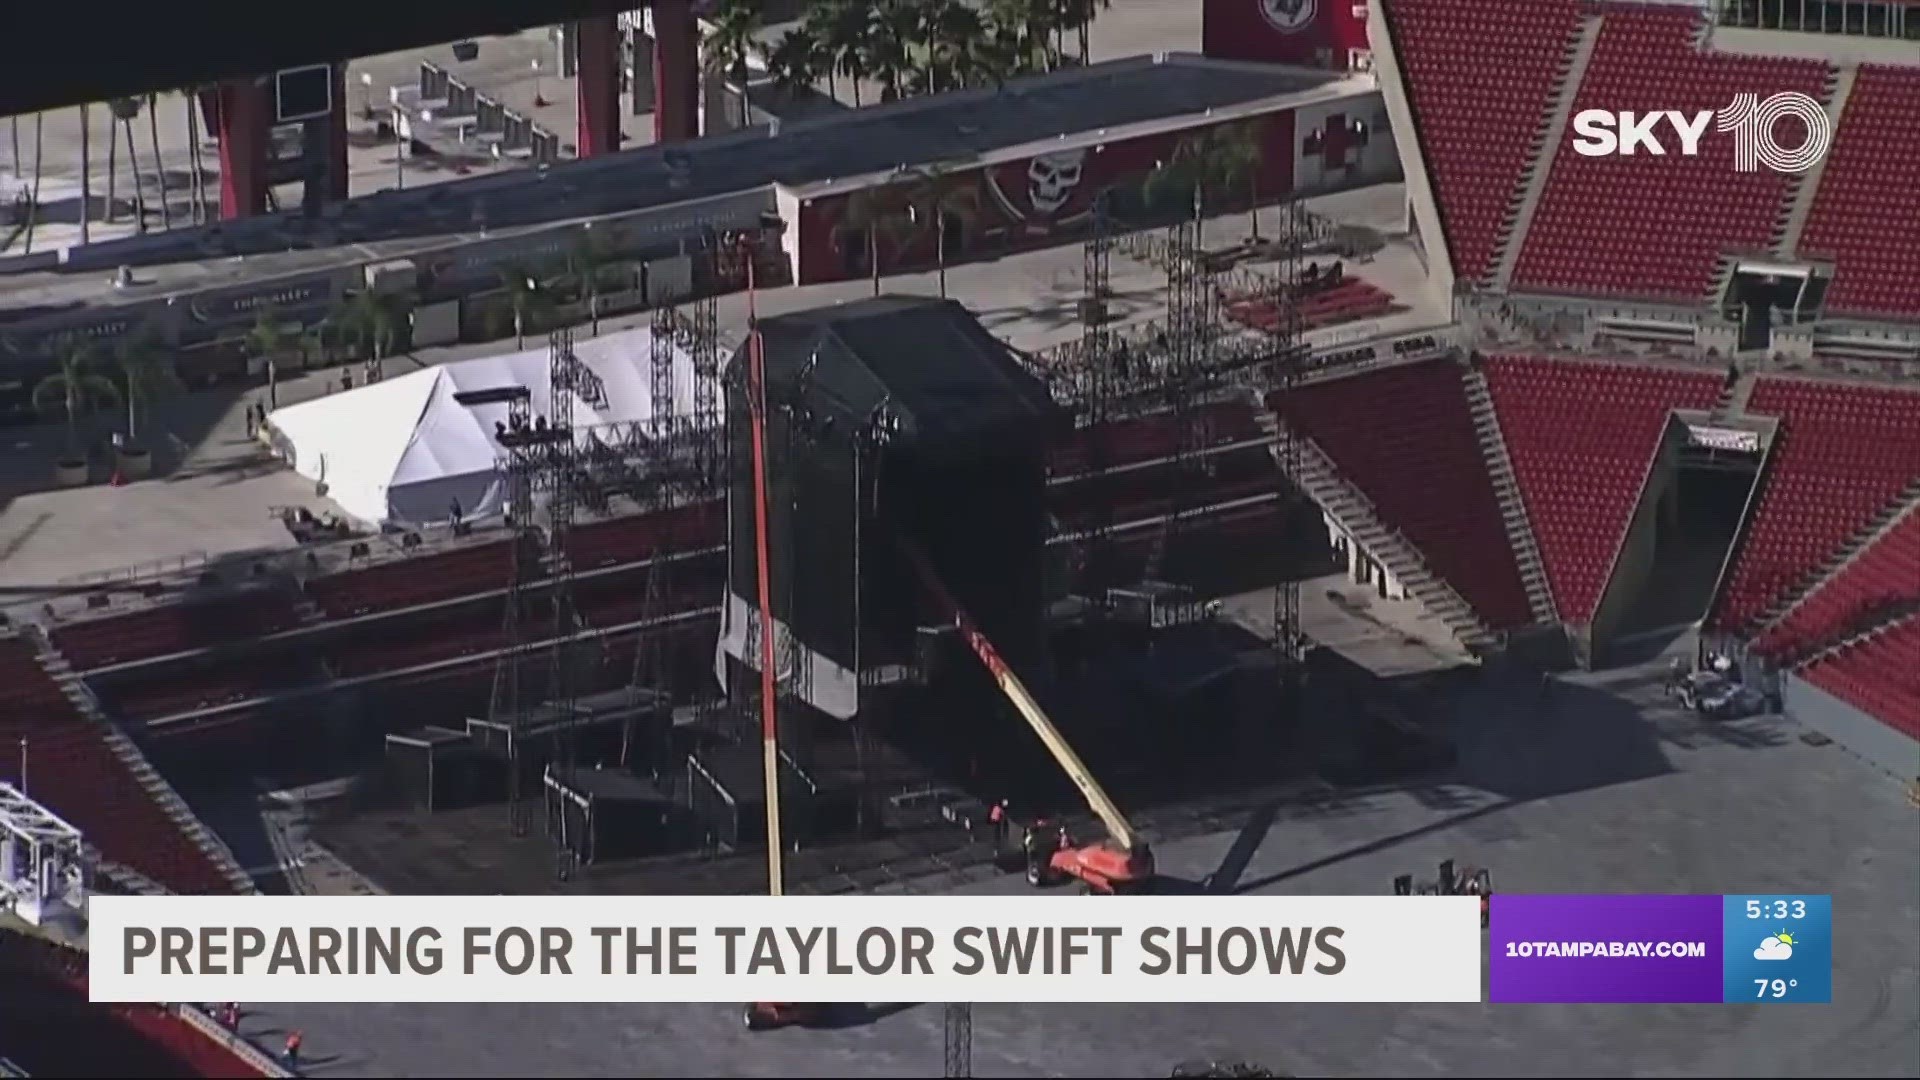 T-Swift will be taking over Raymond James Stadium from April 13-15 for three nights full of hit songs.